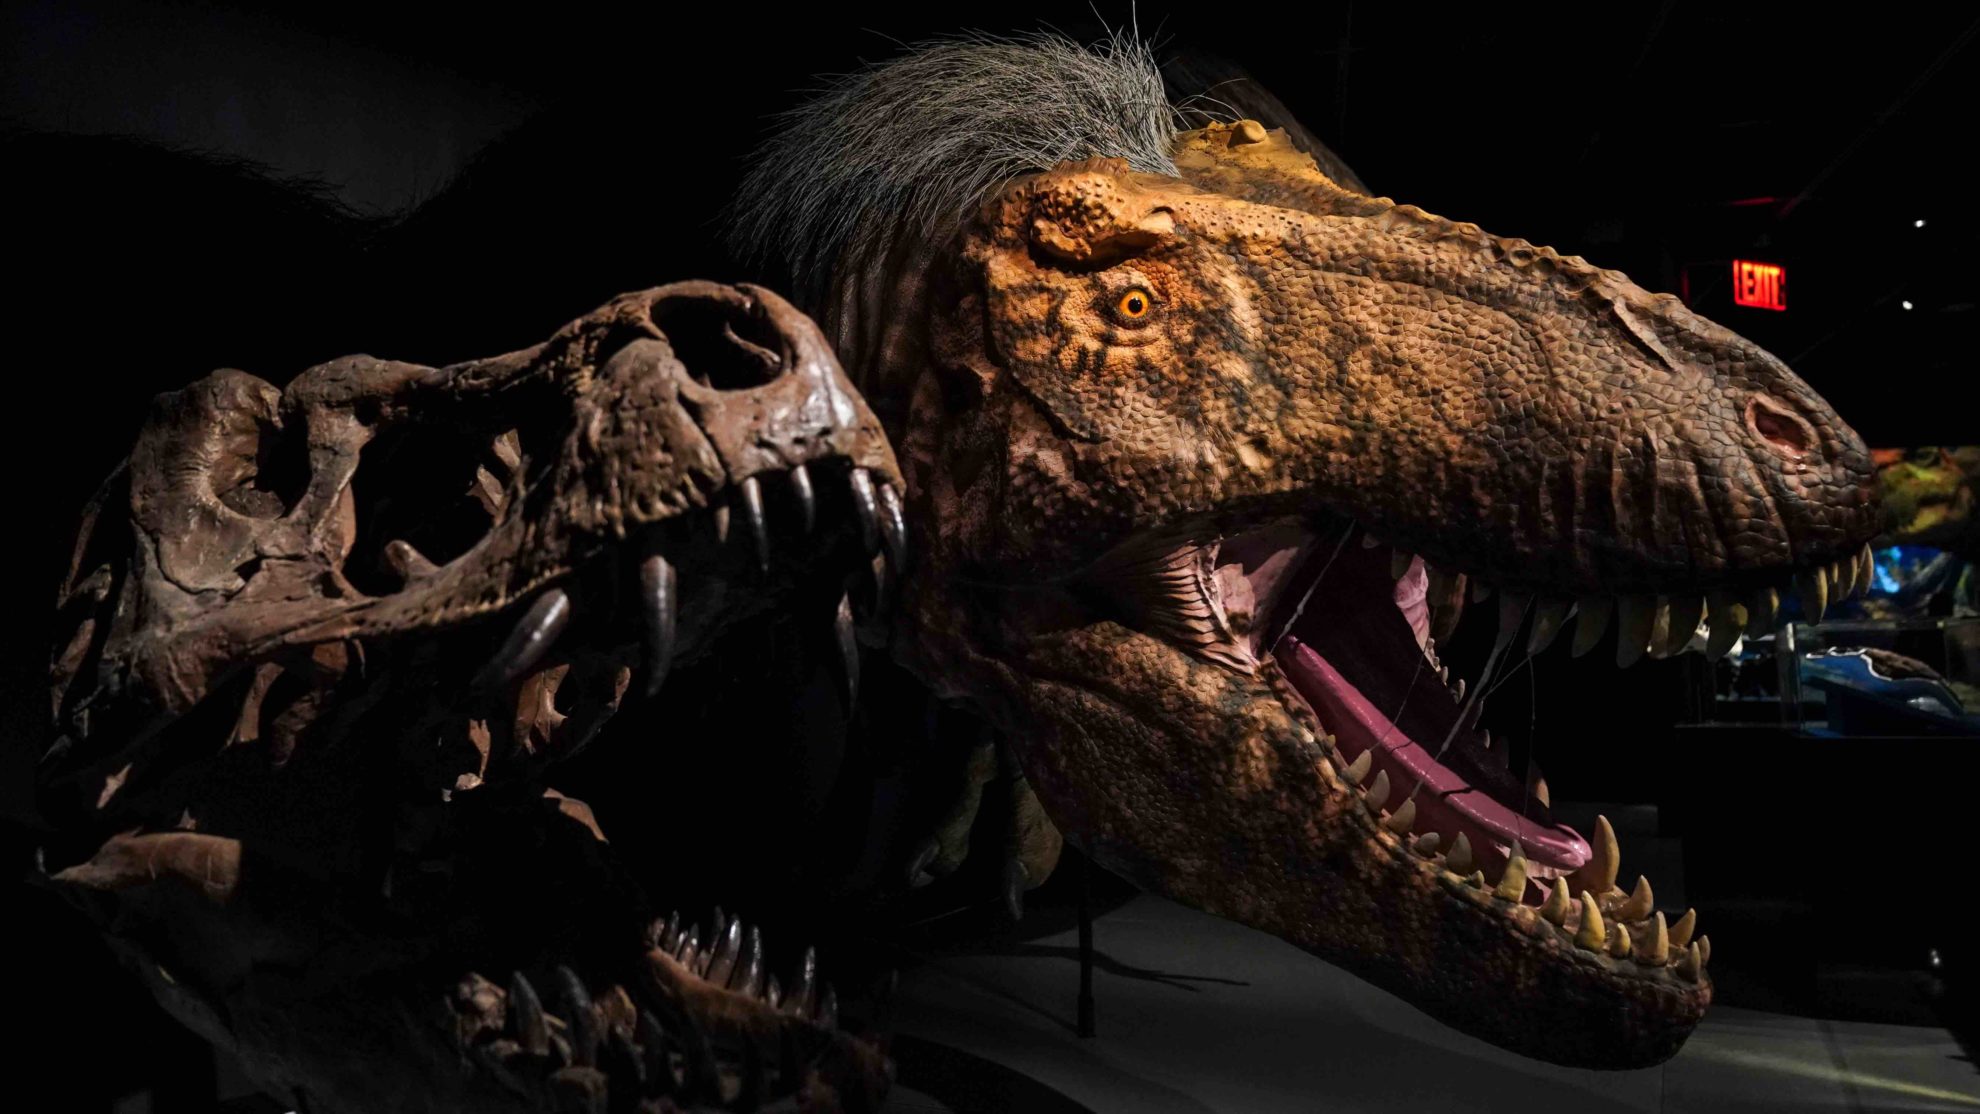 A Tyrannosaurus rex skull next to a model of a feathered T. rex head on display at the American Museum of Natural History in New York.